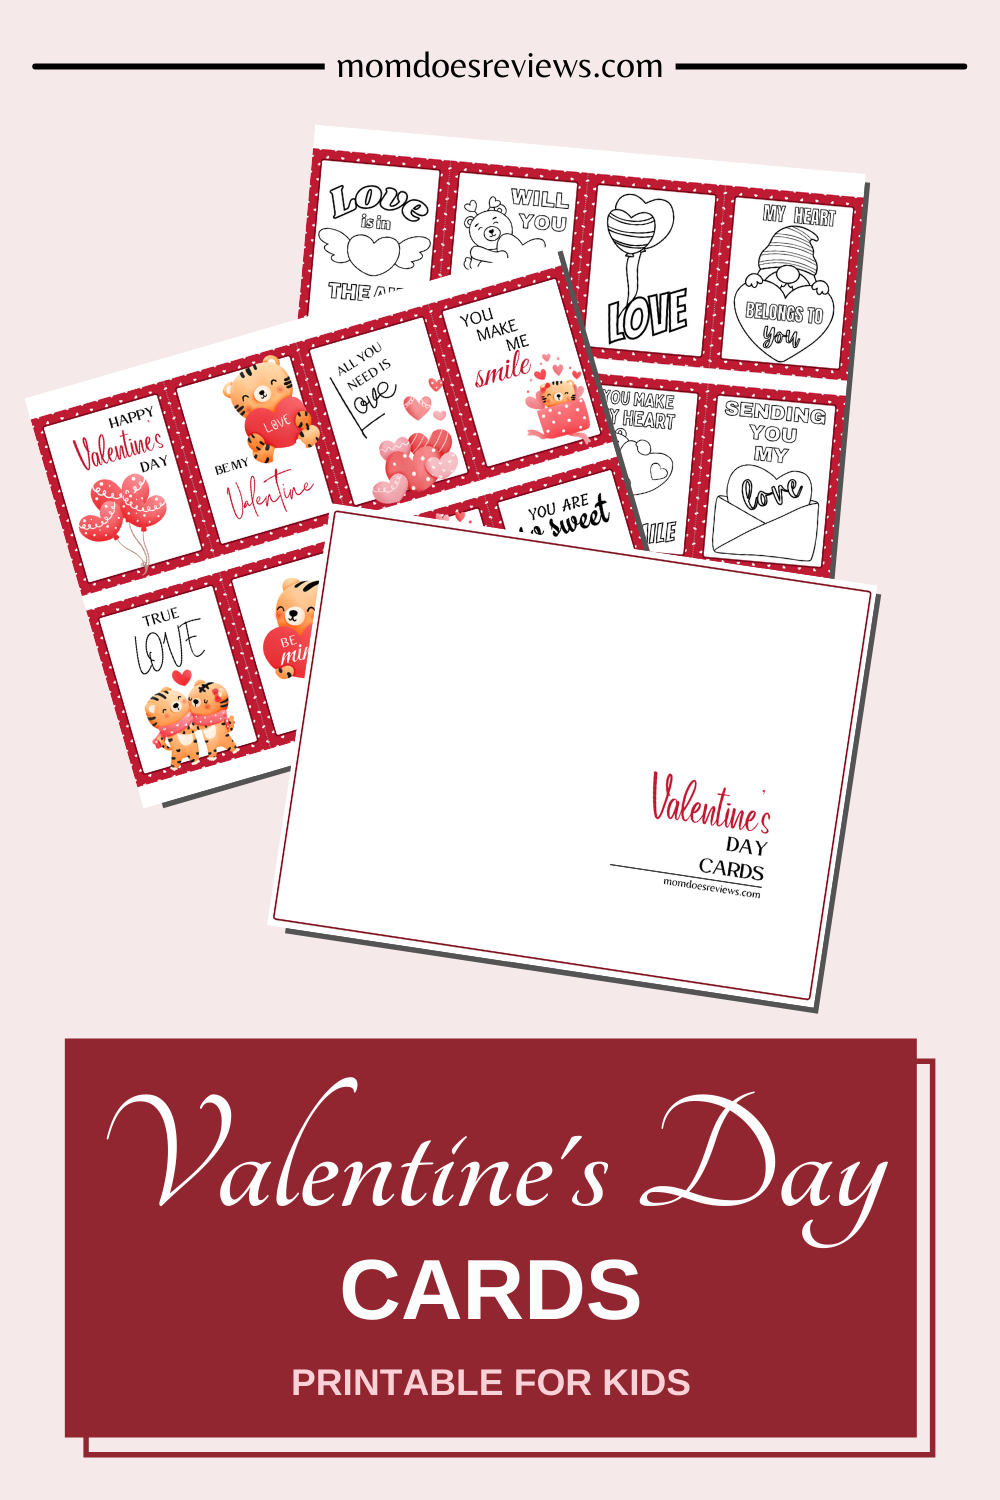 Printable & Customizable Valentine's Day Cards for Kids!